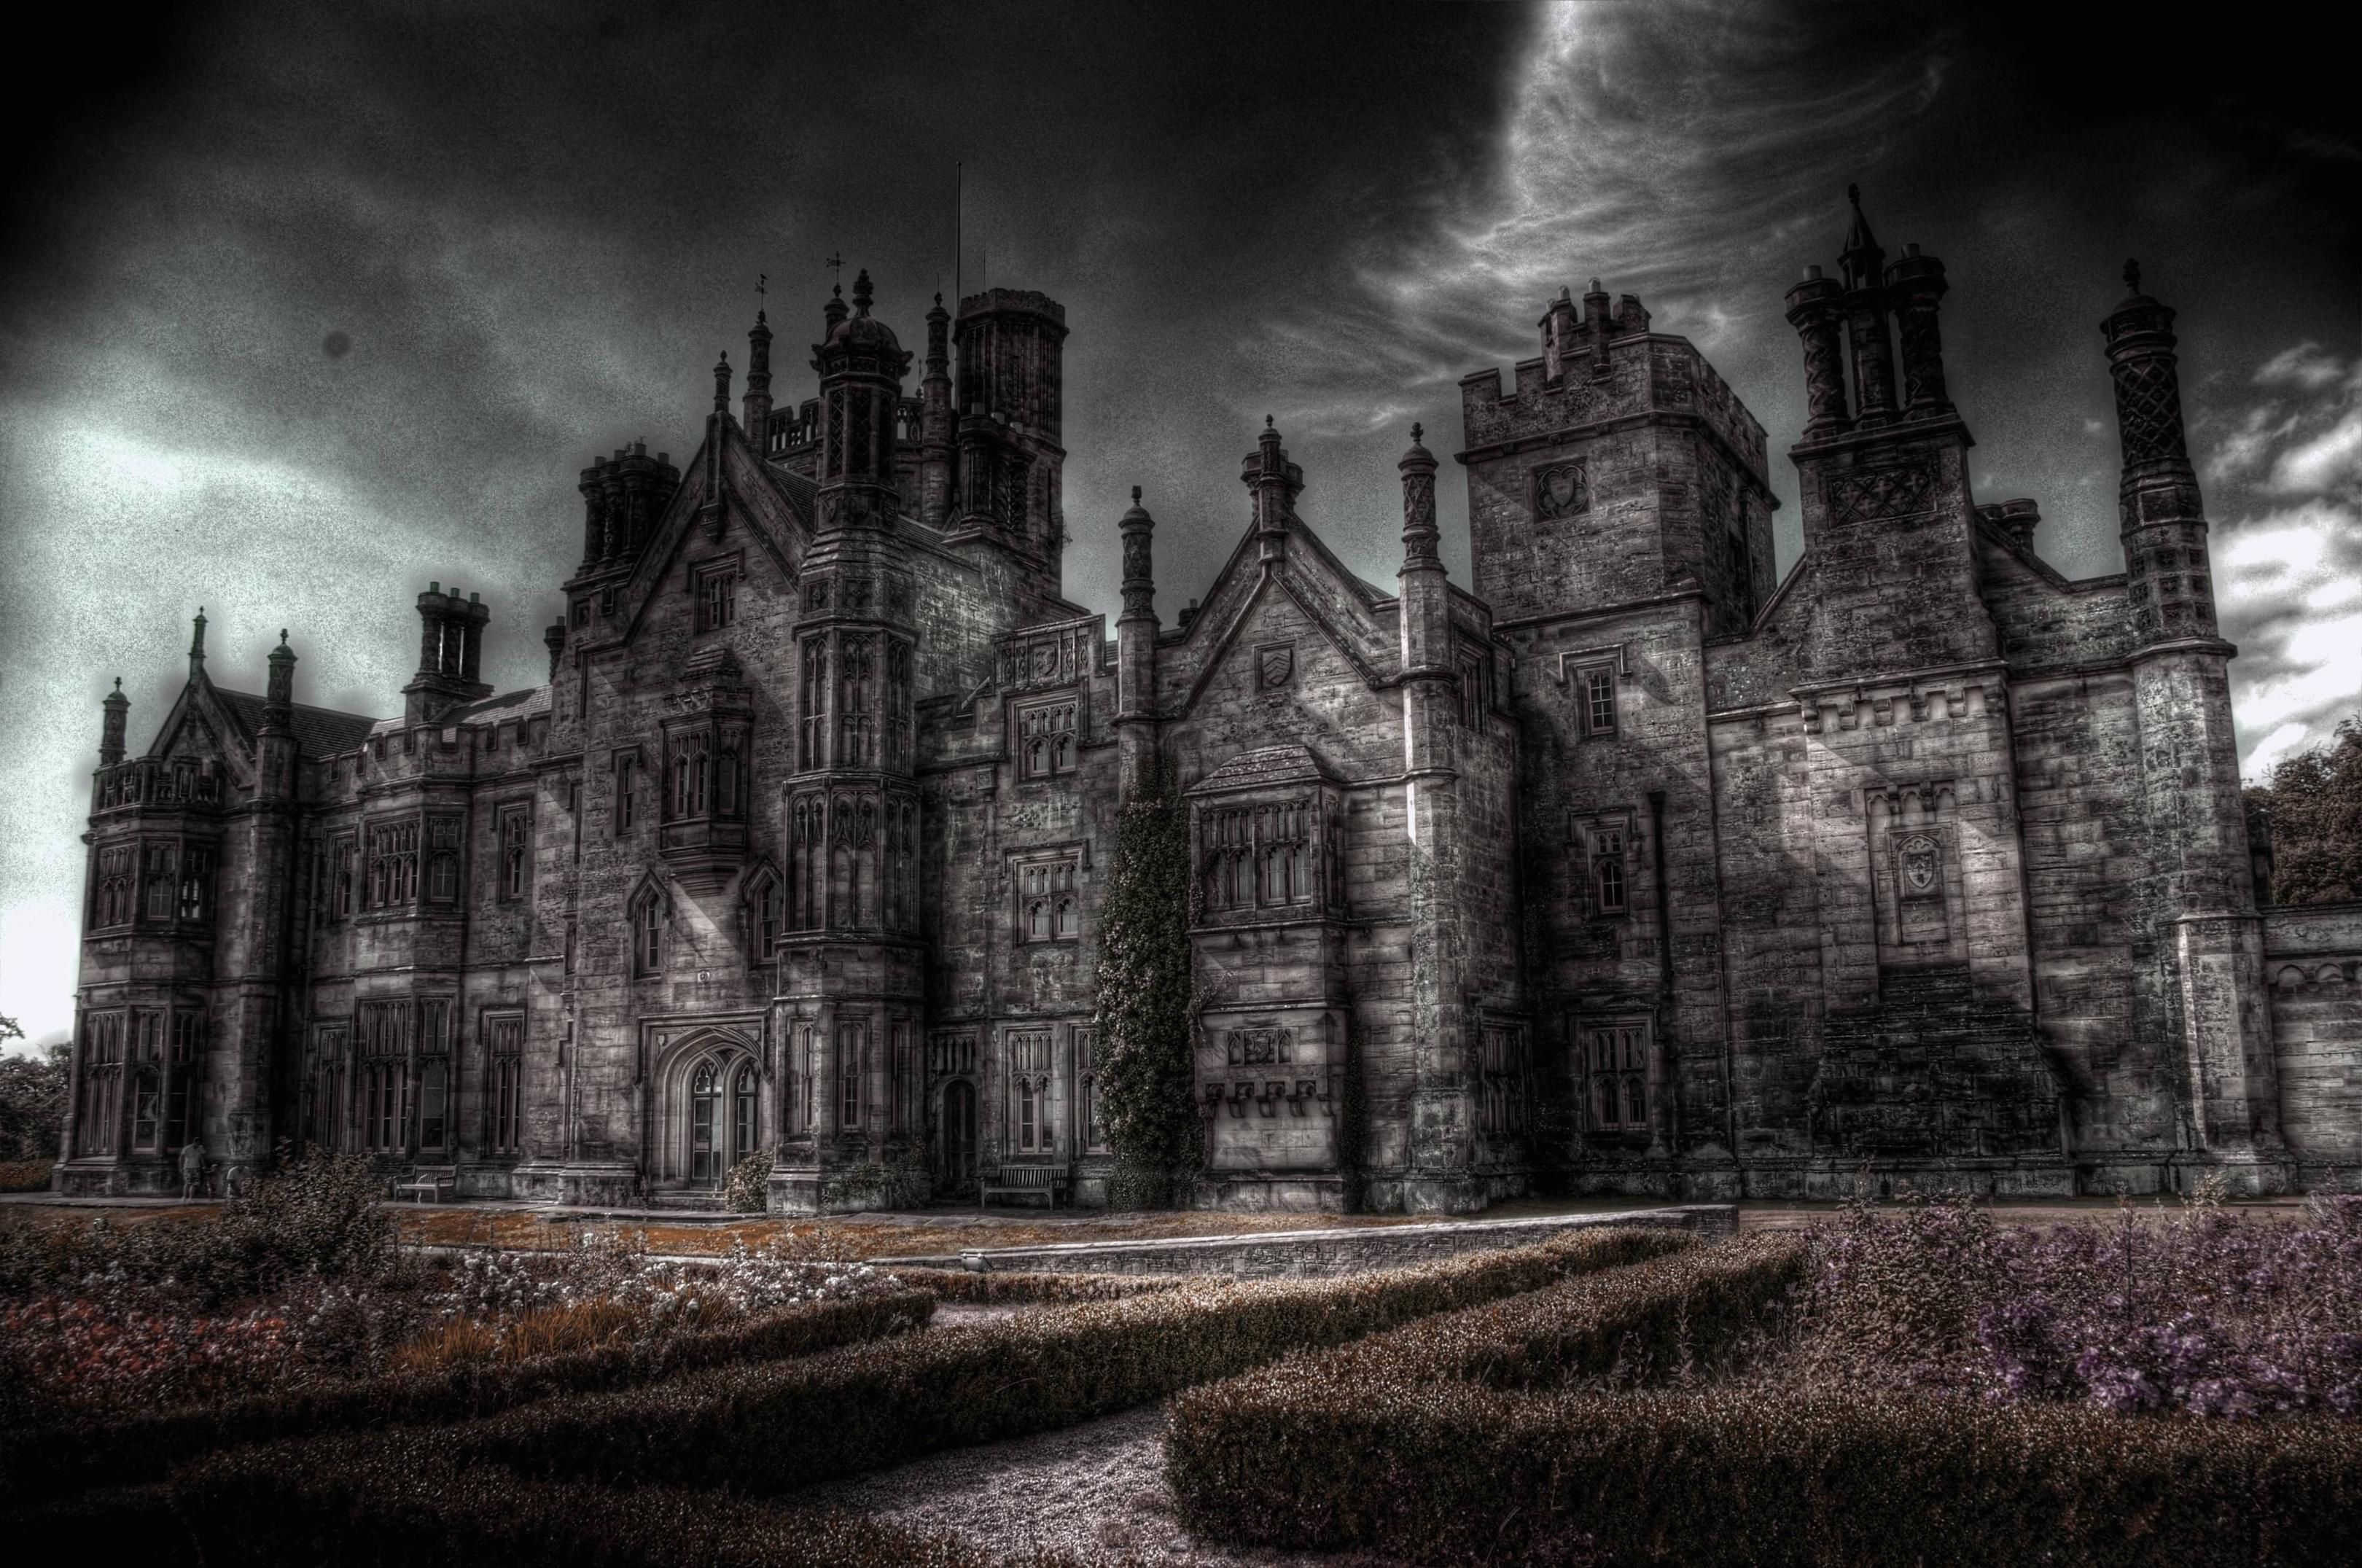 A dark and eerie castle with a moody sky above. - Castle, gothic